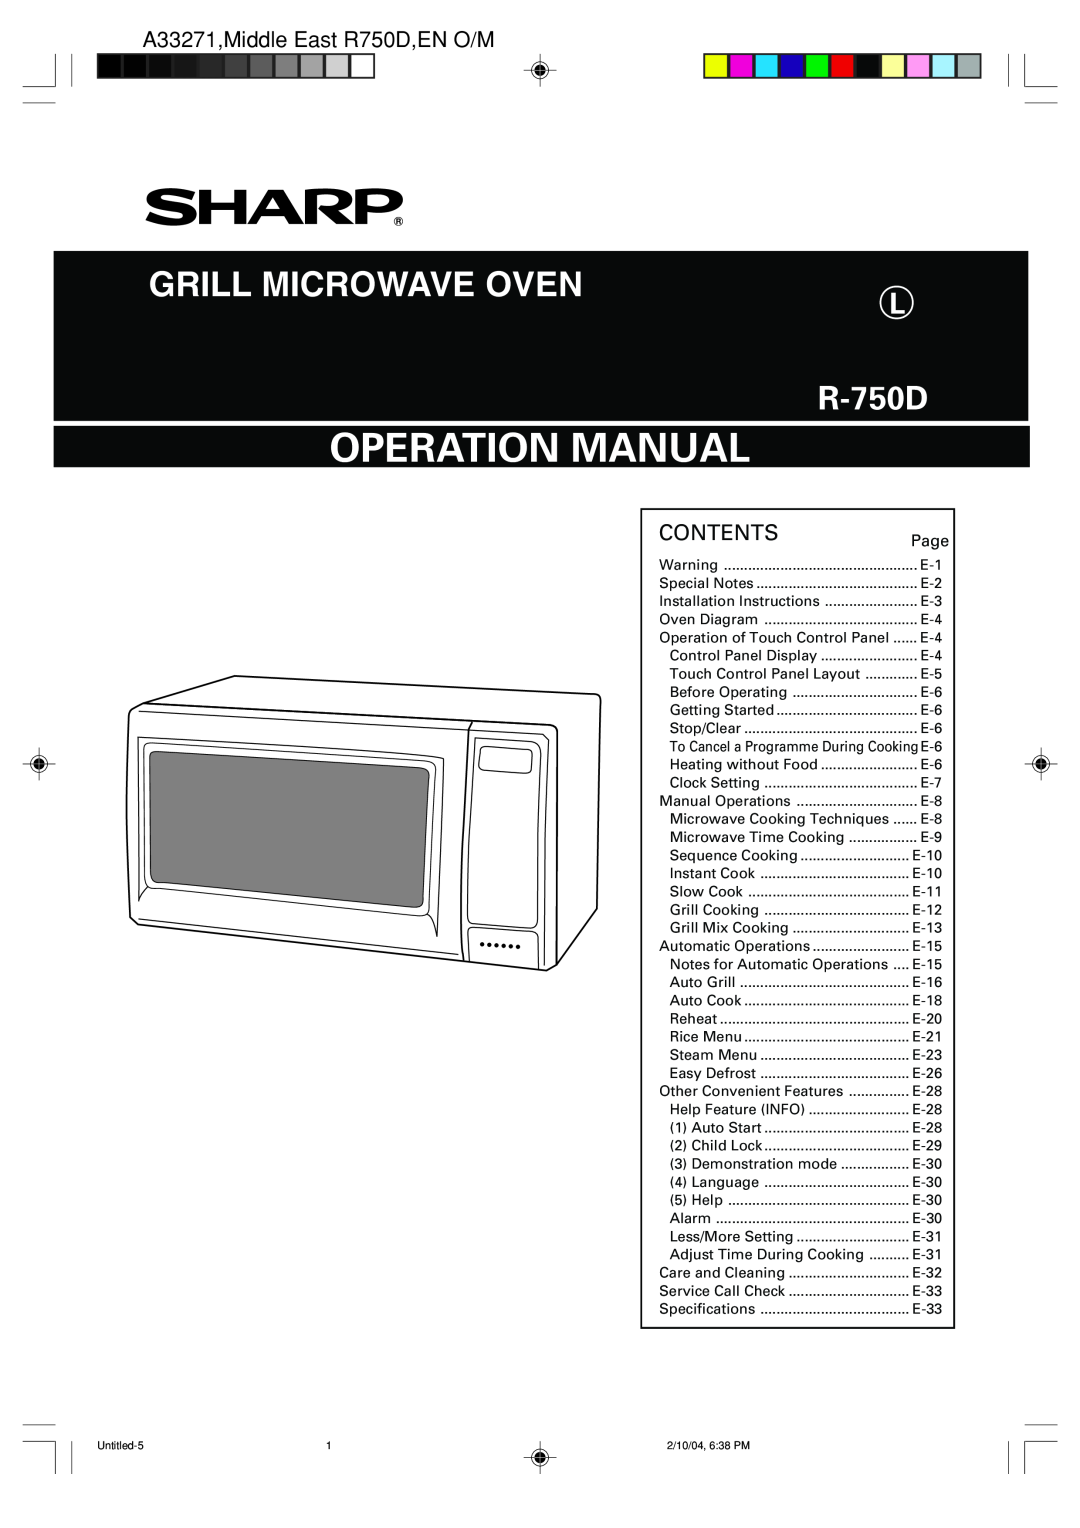 Sharp R-750D operation manual A33271,Middle East R750D,EN O/M, Grill Microwave Oven, Contents 